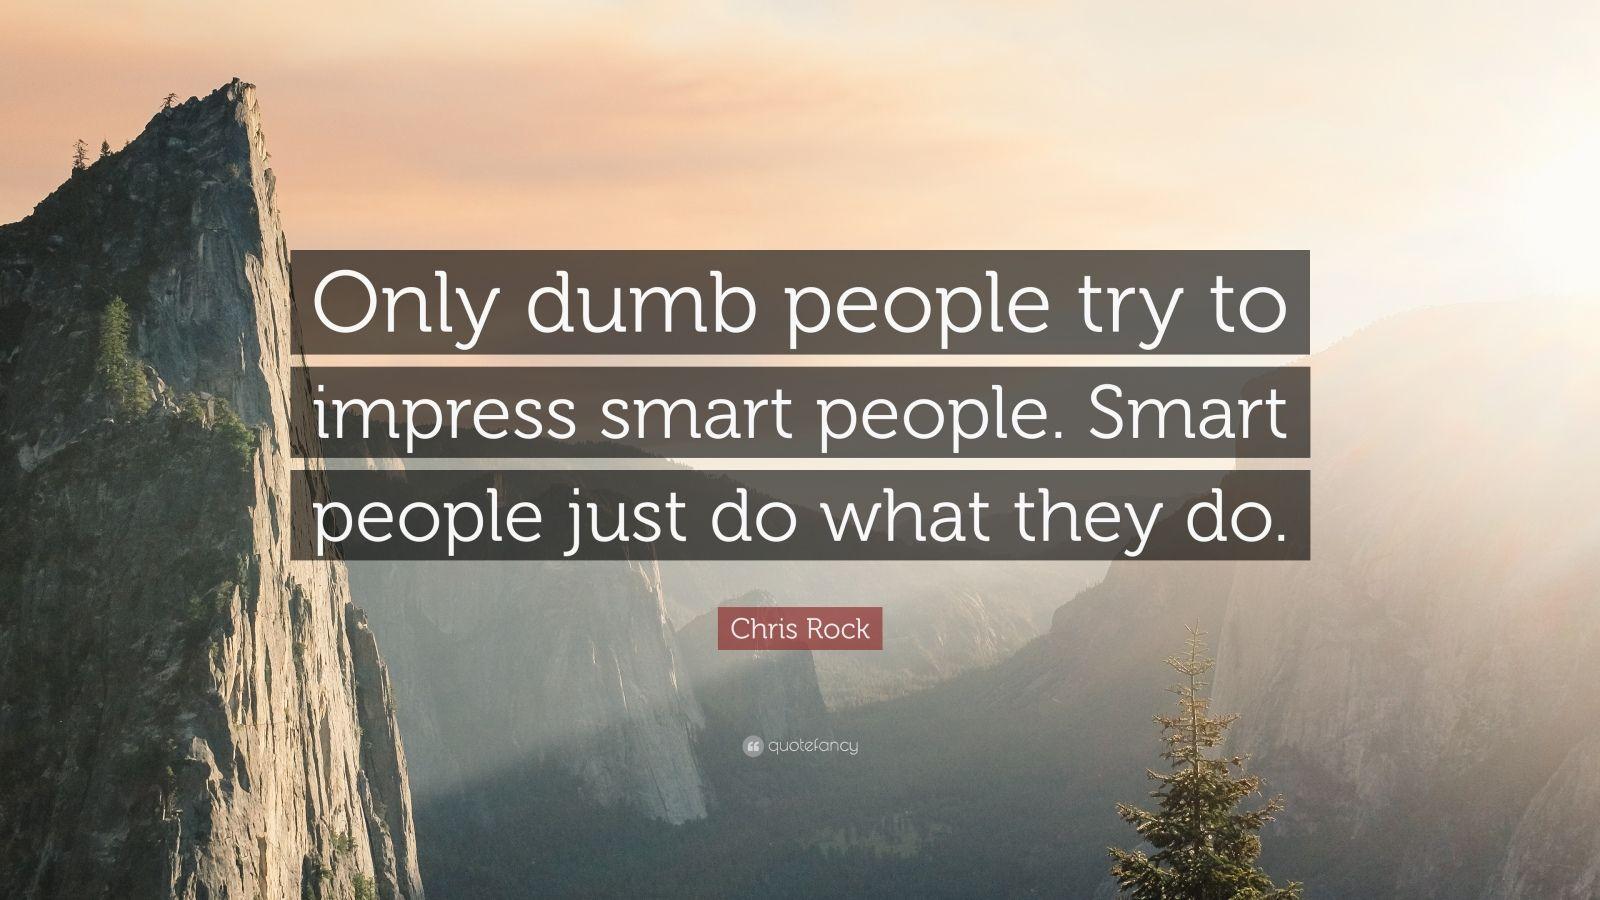 Chris Rock Quote: “Only dumb people try to impress smart people. Smart people just do what they do.”